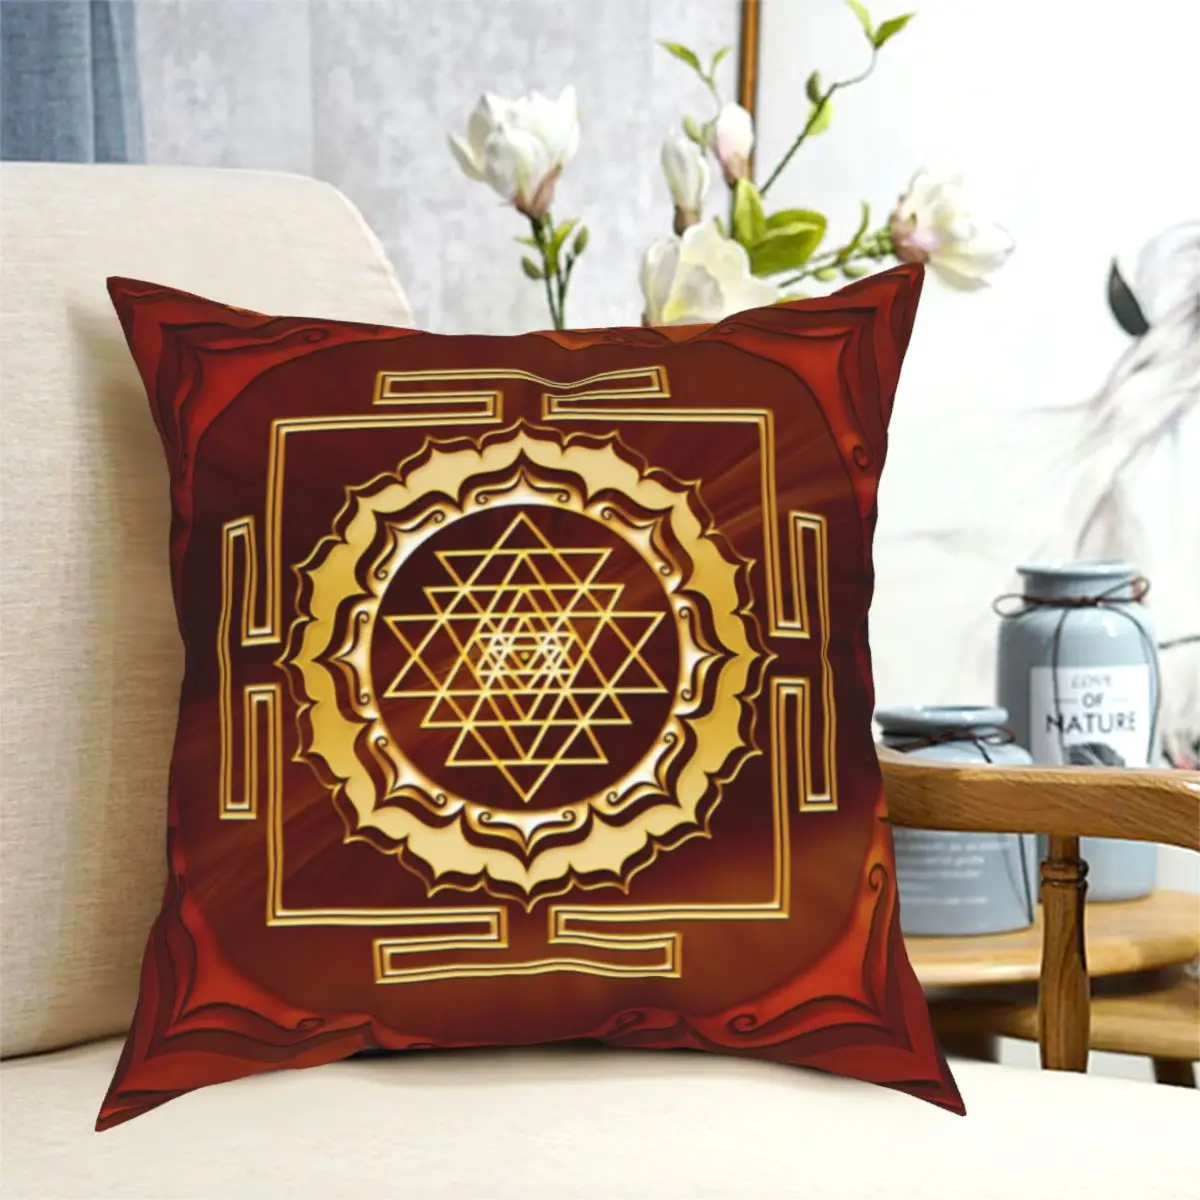 

Shri Yantra Lotus Flower Buddhism Pillowcase Printed Polyester Cushion Cover Decoration Throw Pillow Case Cover Home 45*45cm